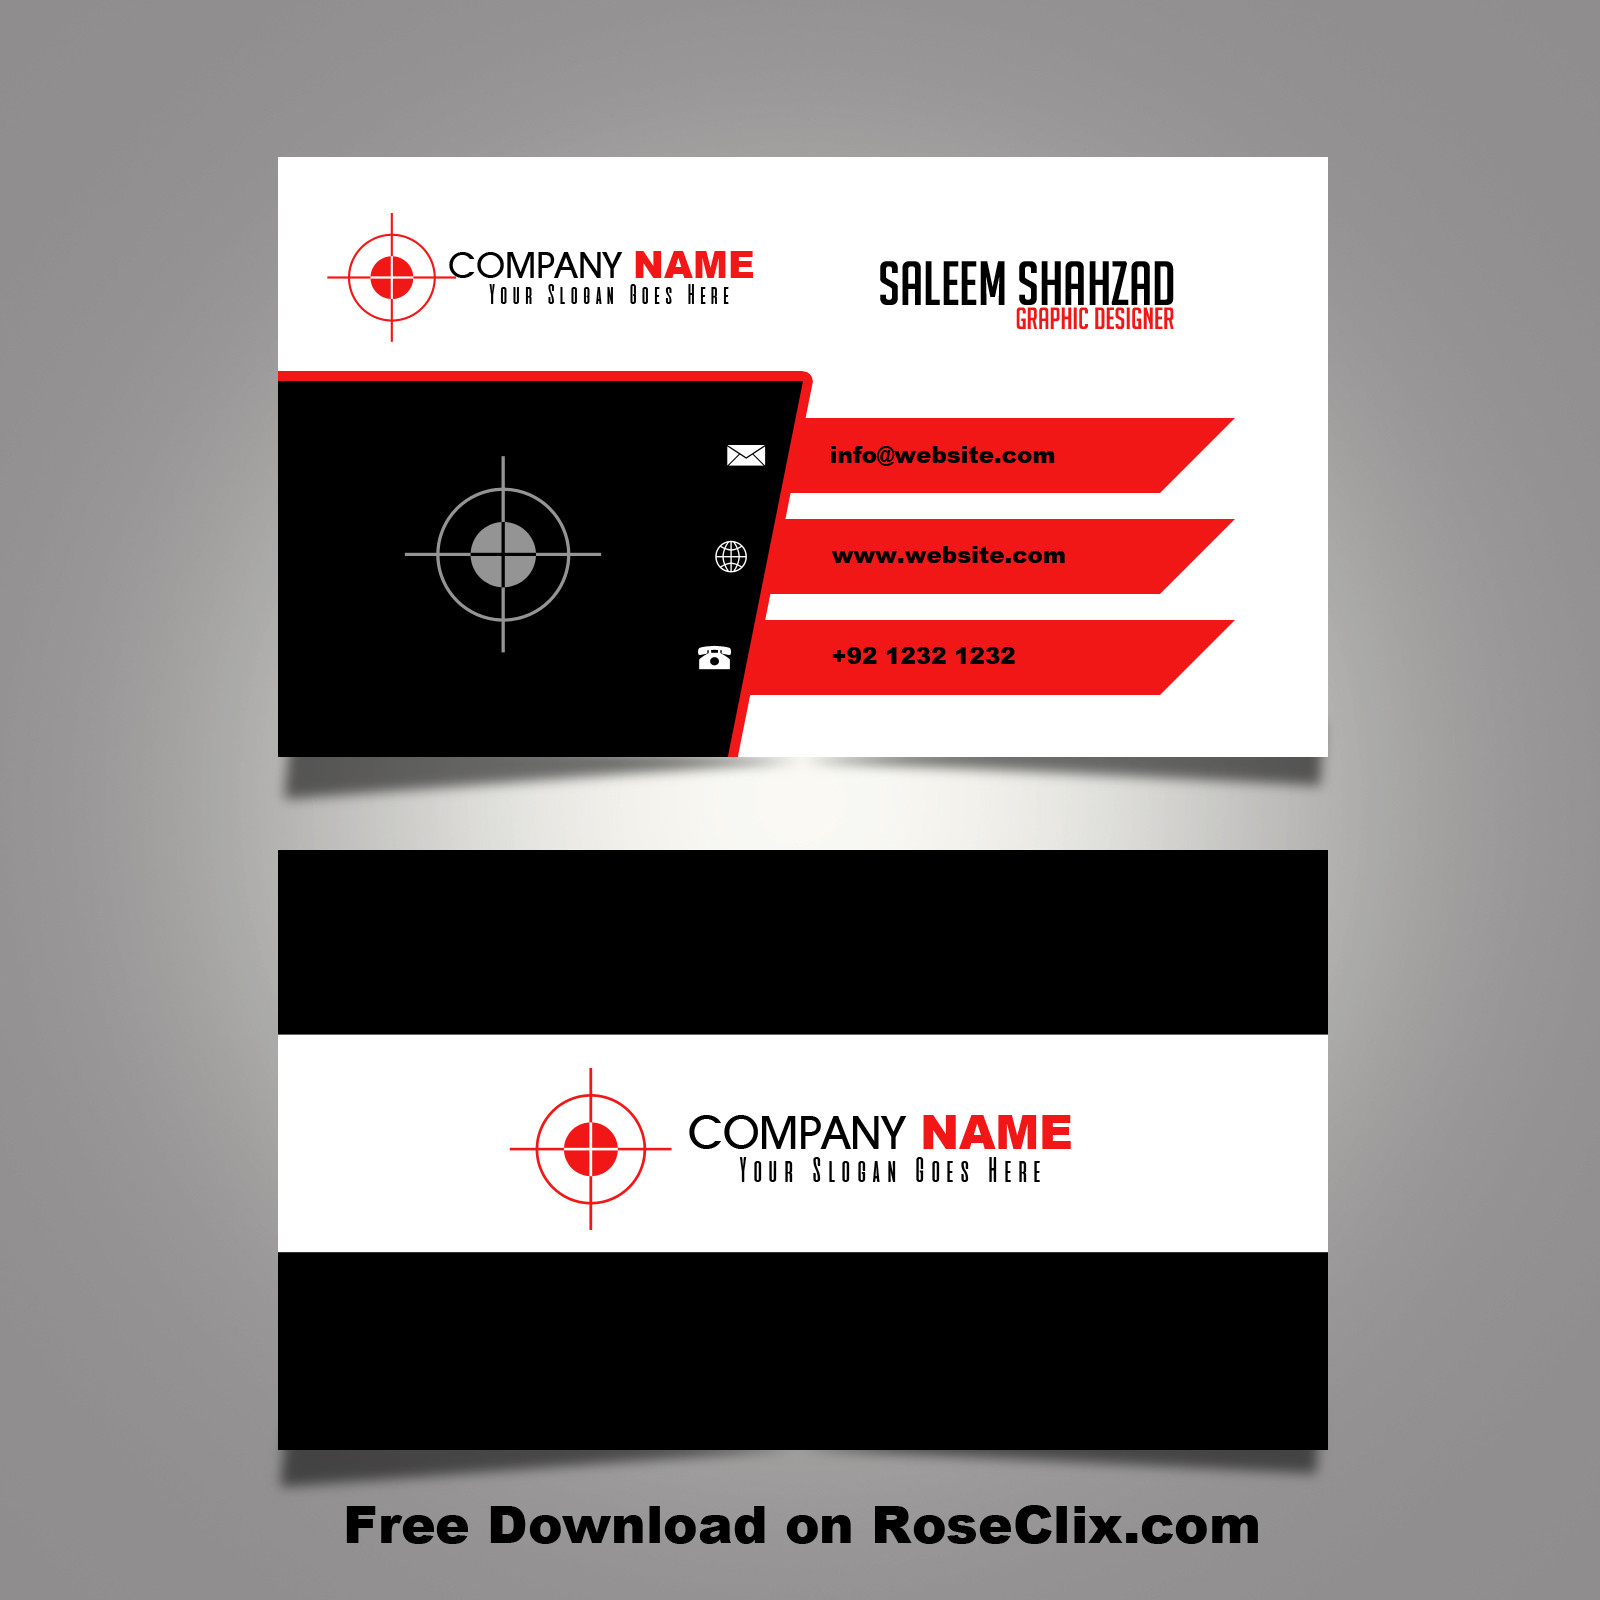 002 245 Gall E00cb9 Template Ideas Free Downloads Of Free Business Card Template Photoshop